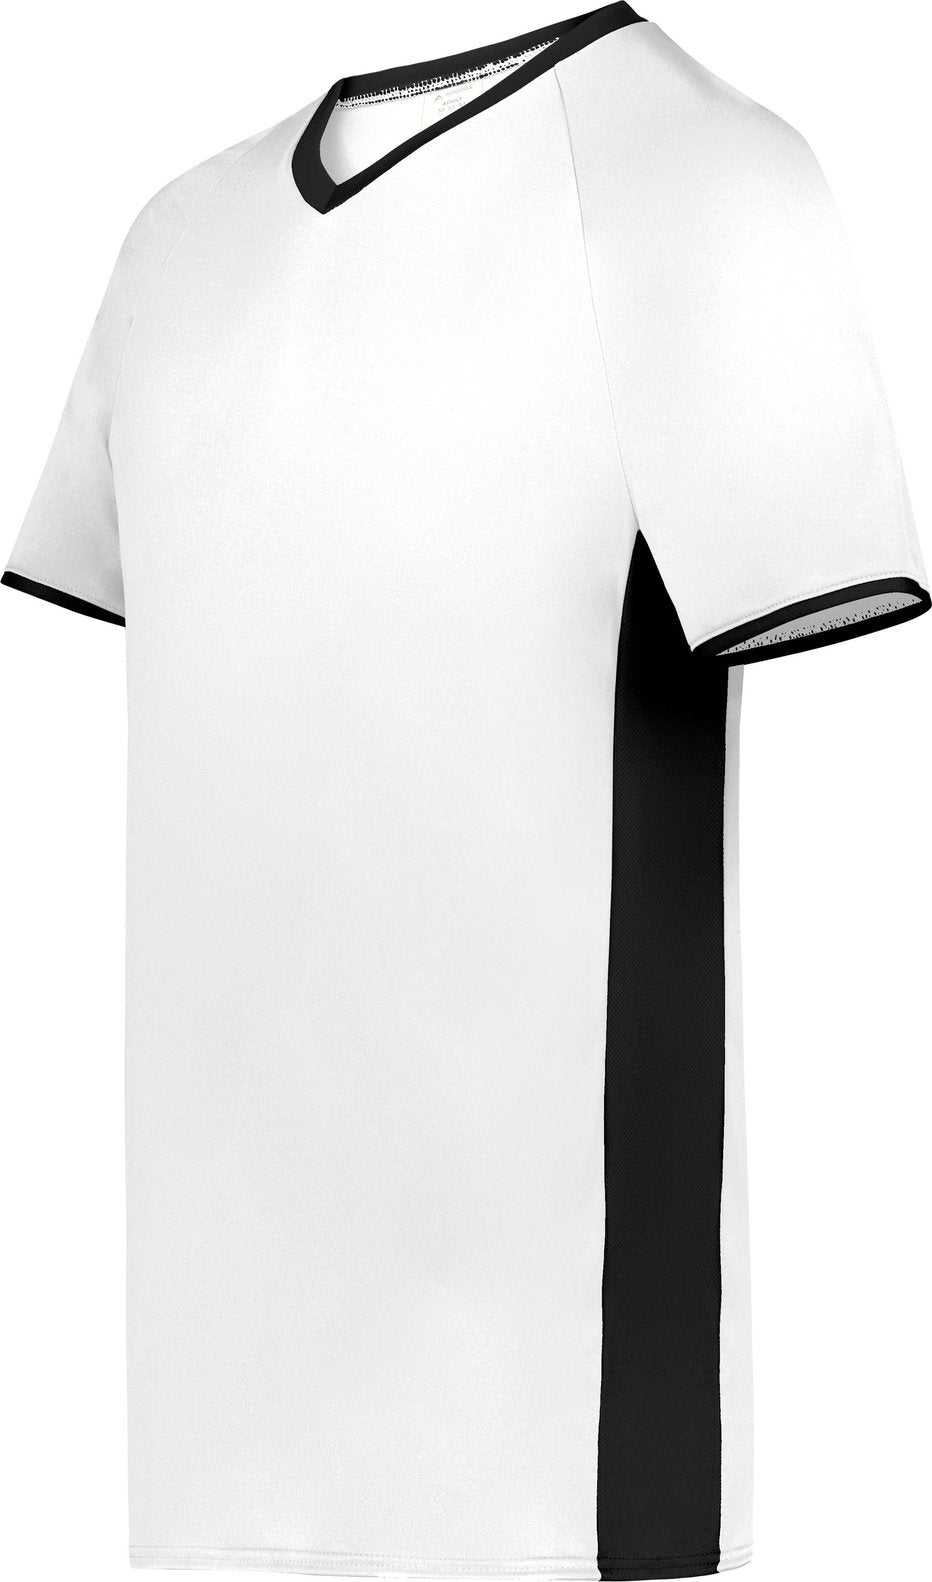 Augusta 6907 Cutter+ V-Neck Jersey - White Black - HIT a Double